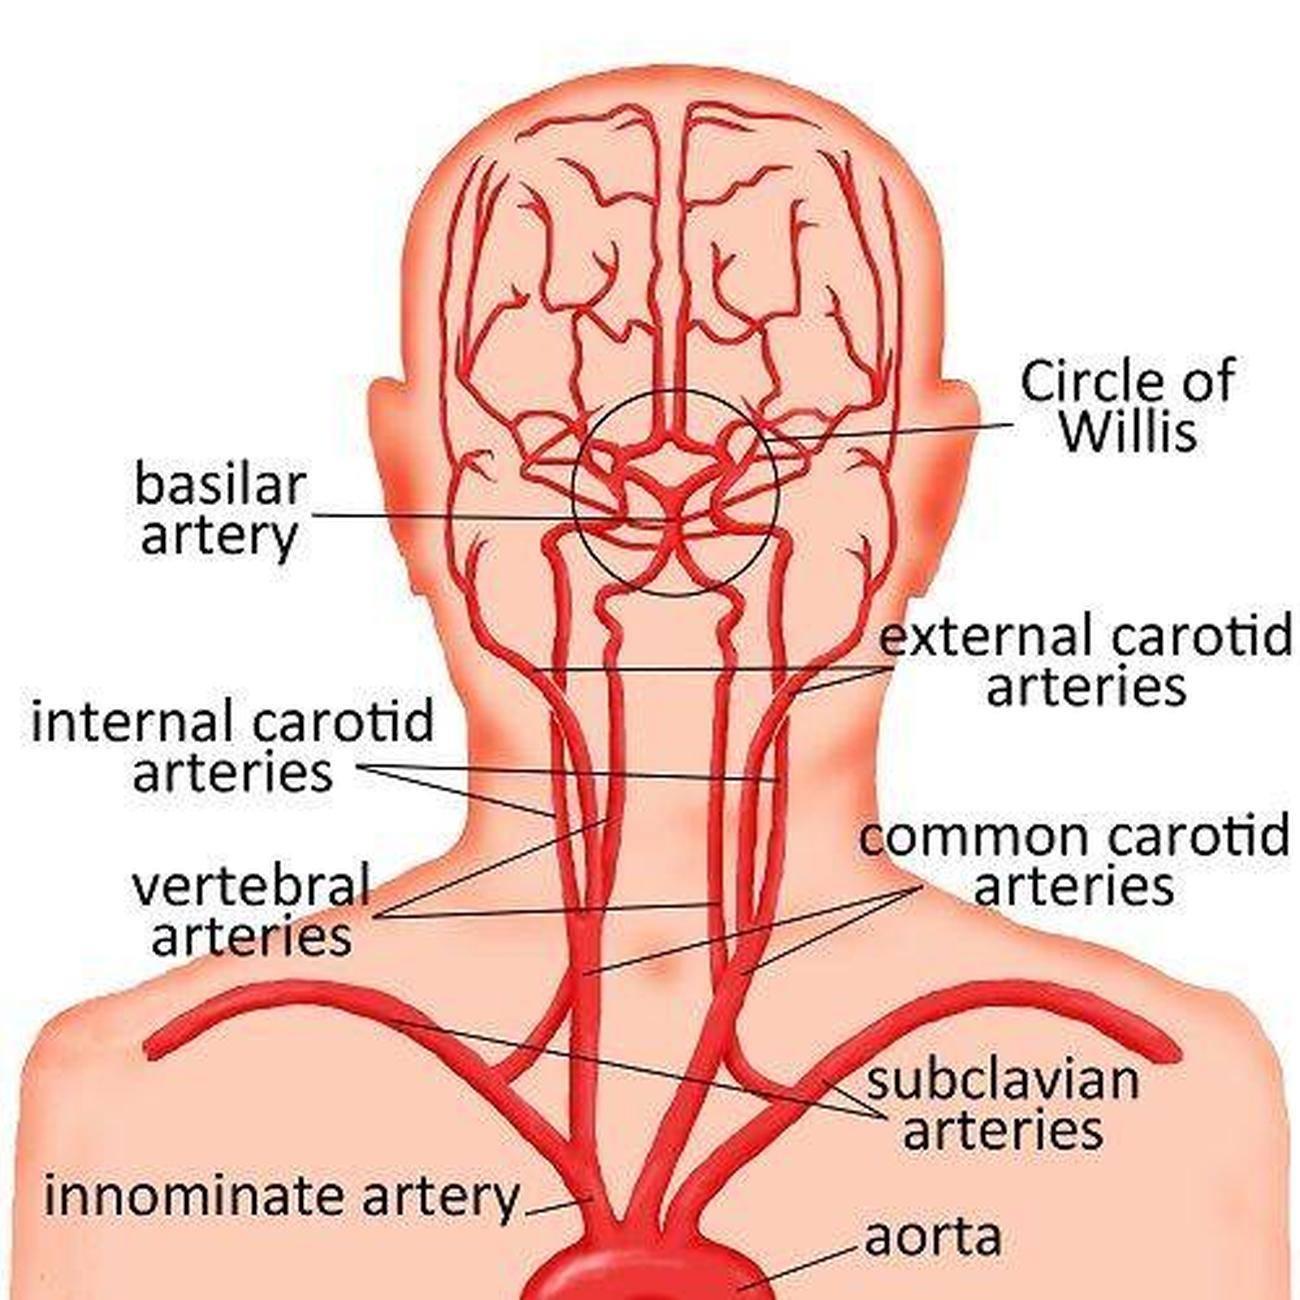 Pictures Of Carotid Arteries